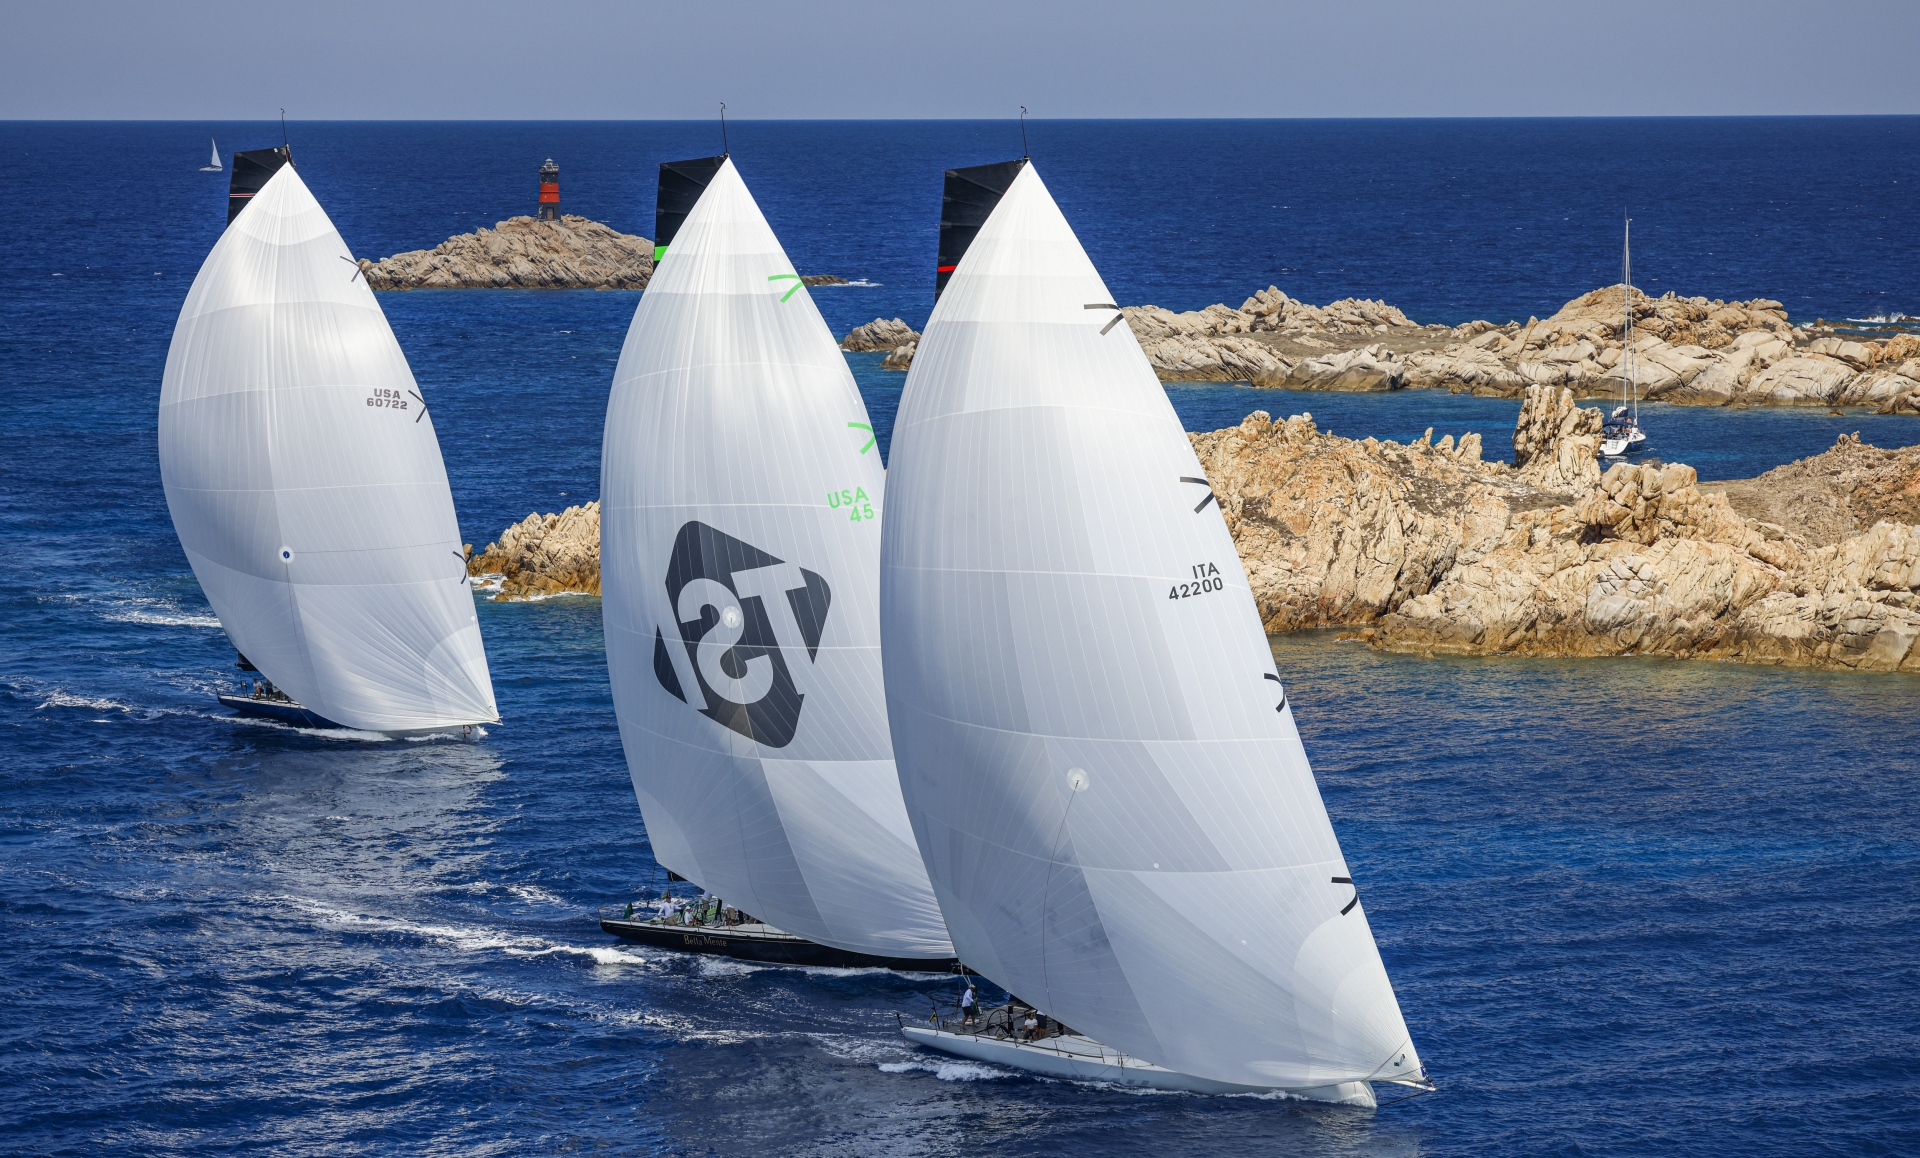 50 entries taking part in 32nd edition of Maxi Yacht Rolex Cup - News - Yacht Club Costa Smeralda